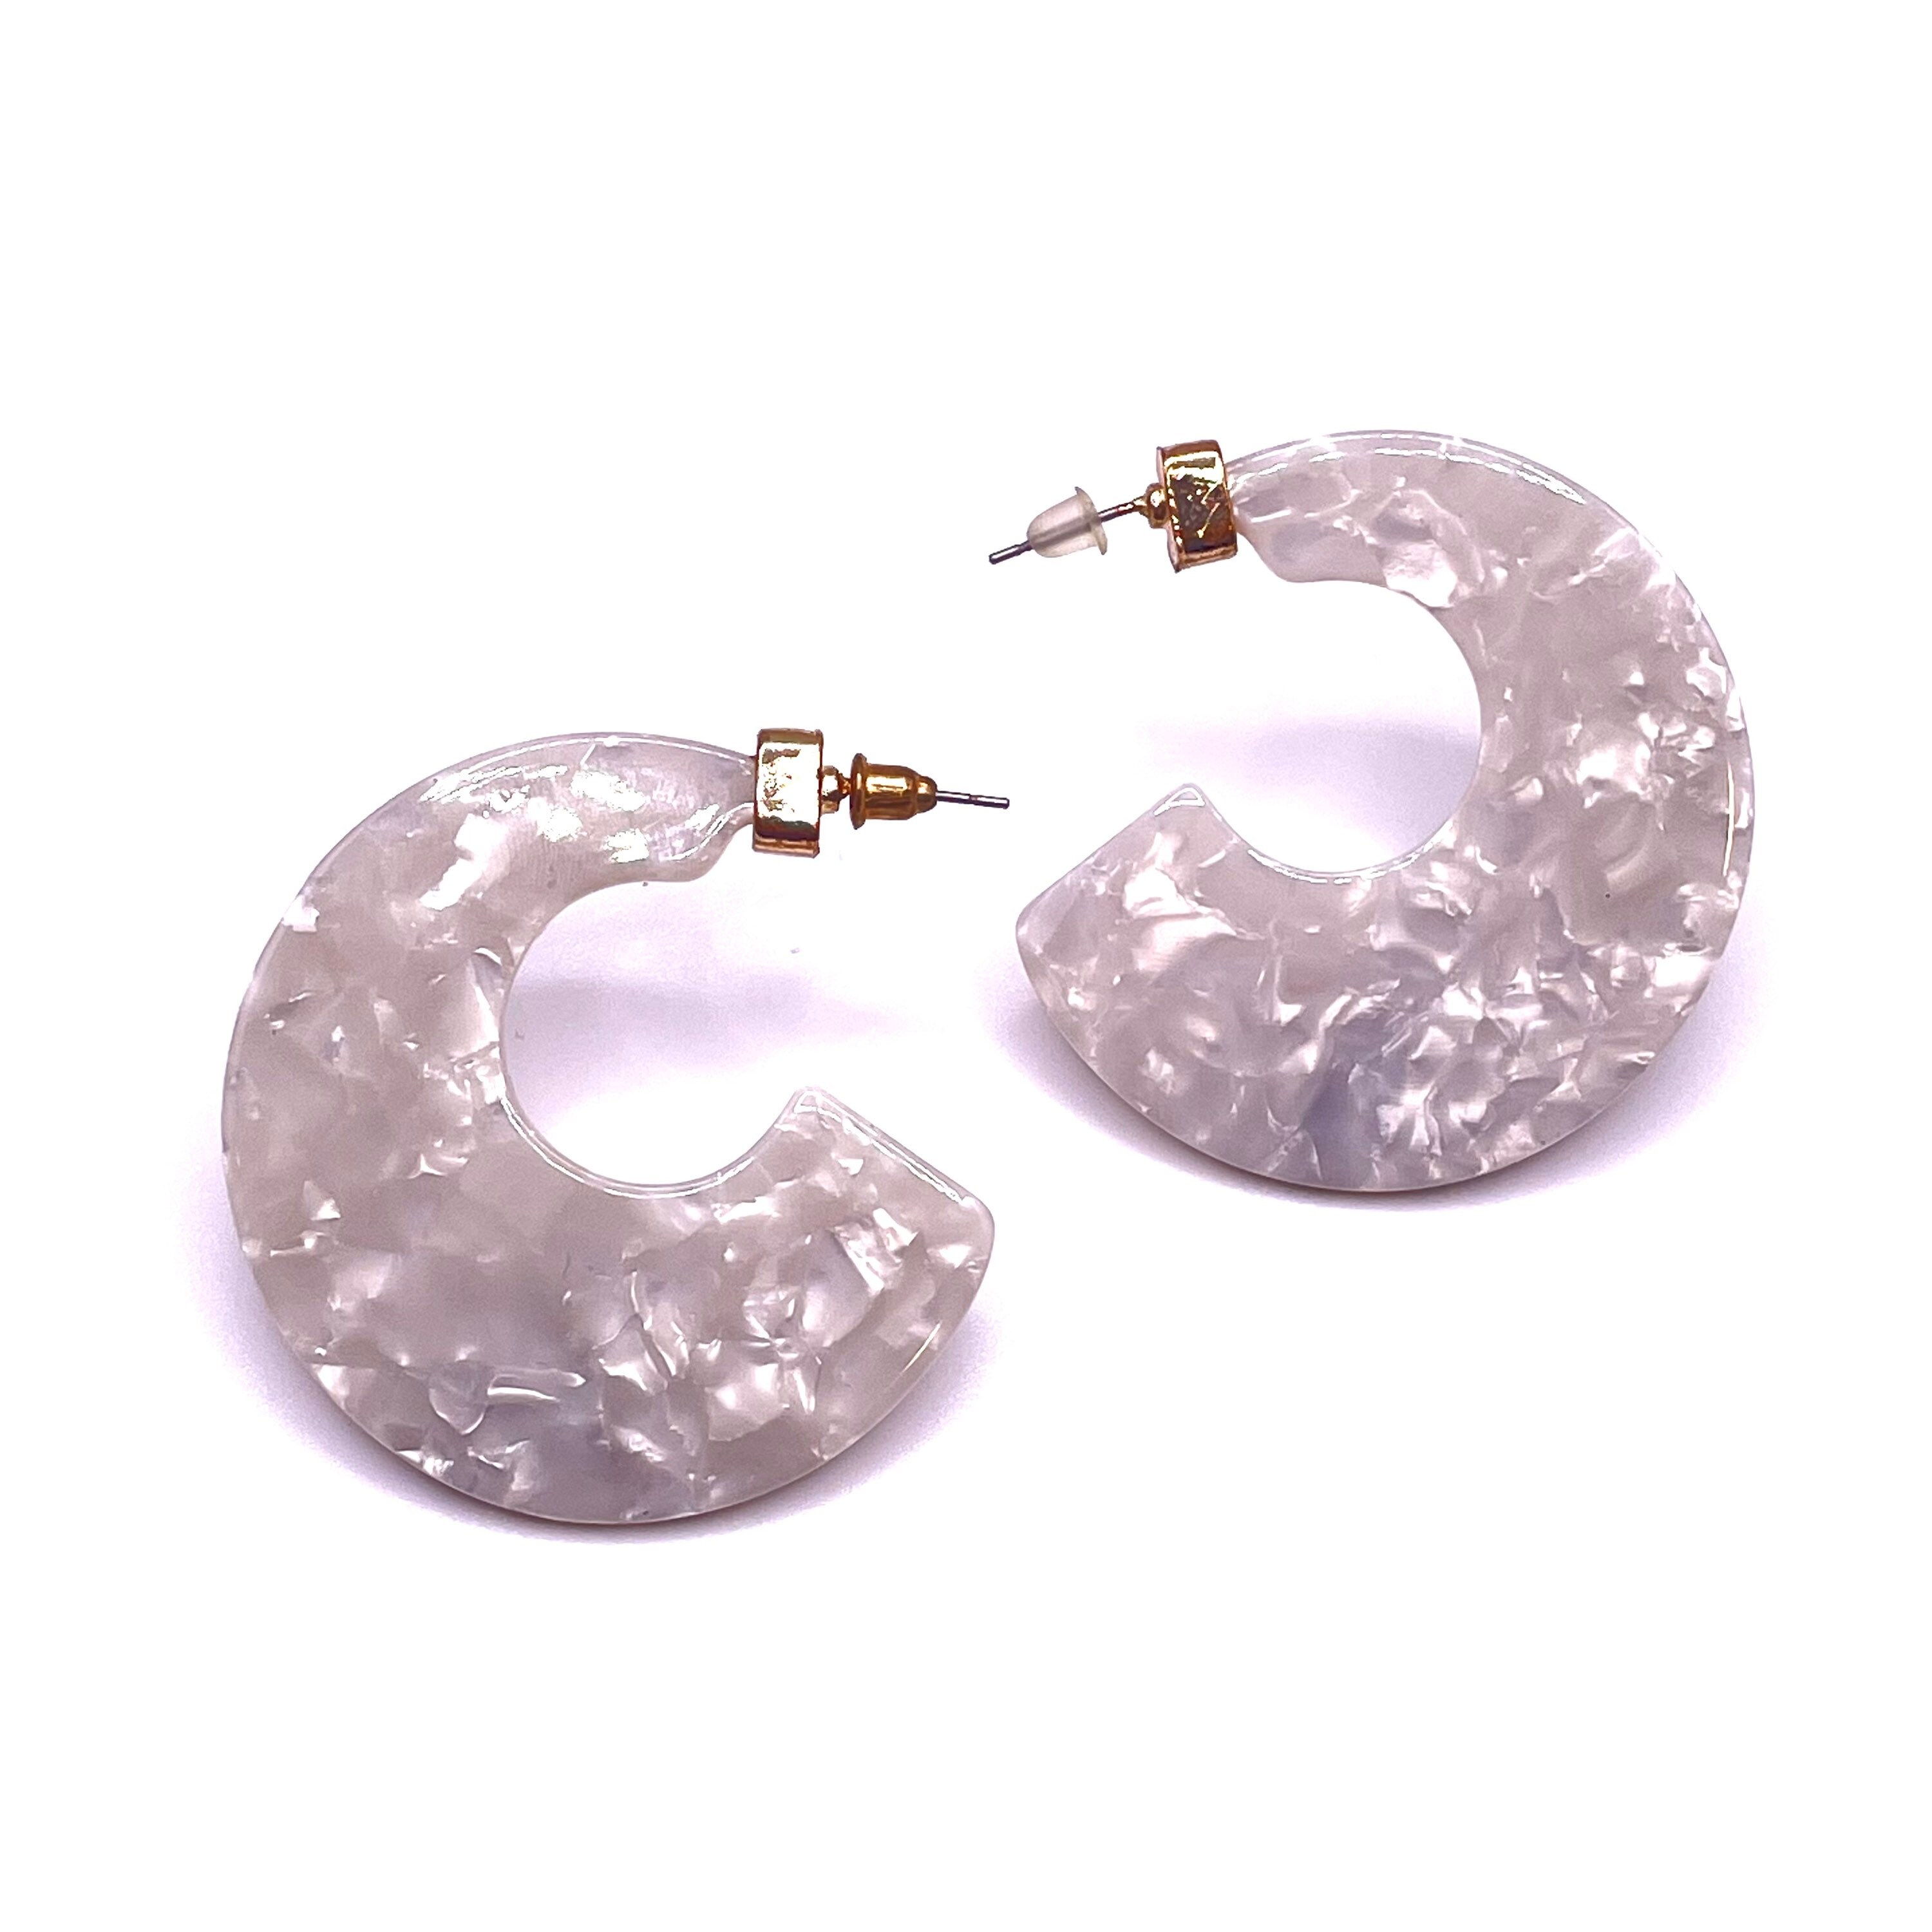 Details about   vintage 1930s/40s deco clamshell style white moonglow lucite earrings